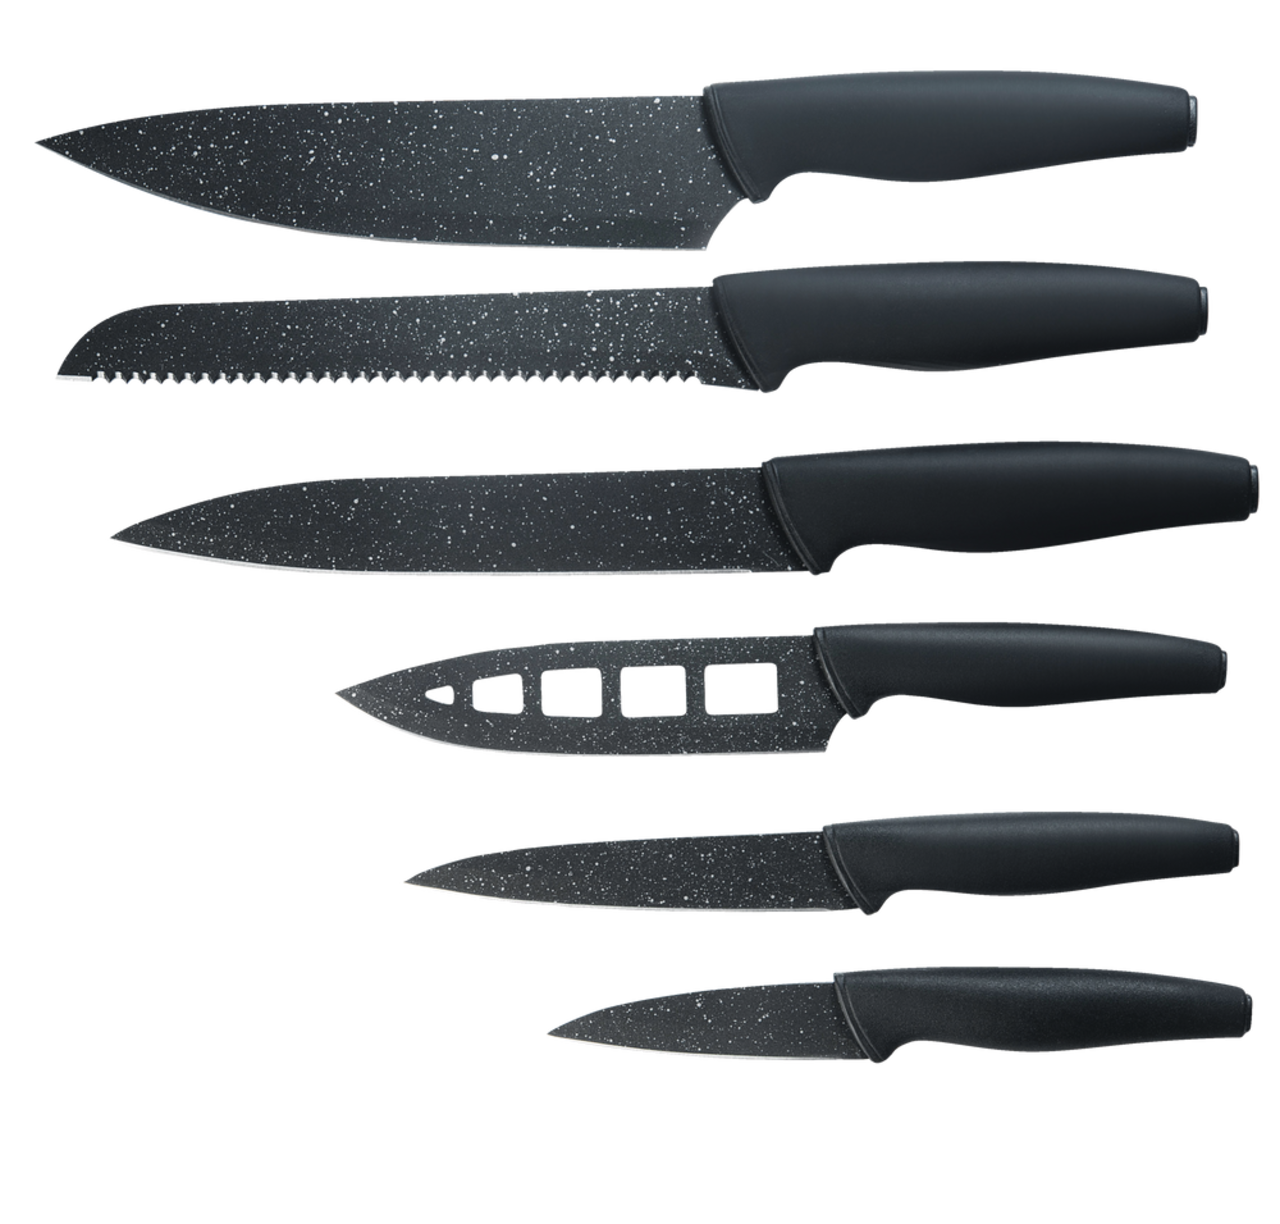 https://media-www.canadiantire.ca/product/living/as-seen-on-tv/asotv/3997611/as-seen-on-tv-magma-steel-knife-set-0794d90f-71b6-4e9f-8179-72d24db11c50.png?imdensity=1&imwidth=1244&impolicy=mZoom